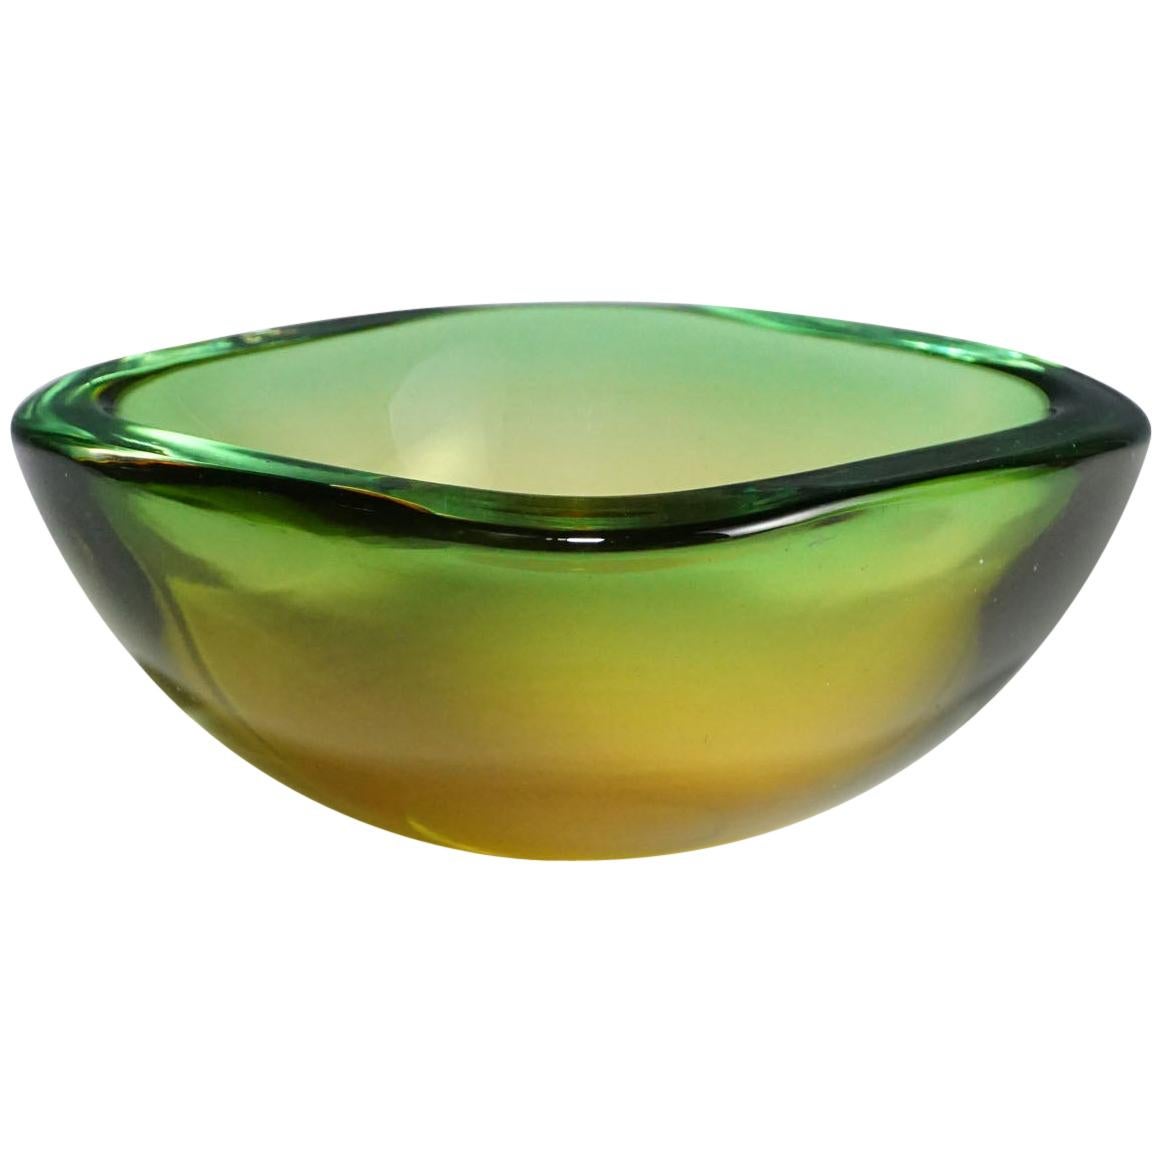 Gino Cenedese Attributed to Sommerso Glass Bowl, circa 1960